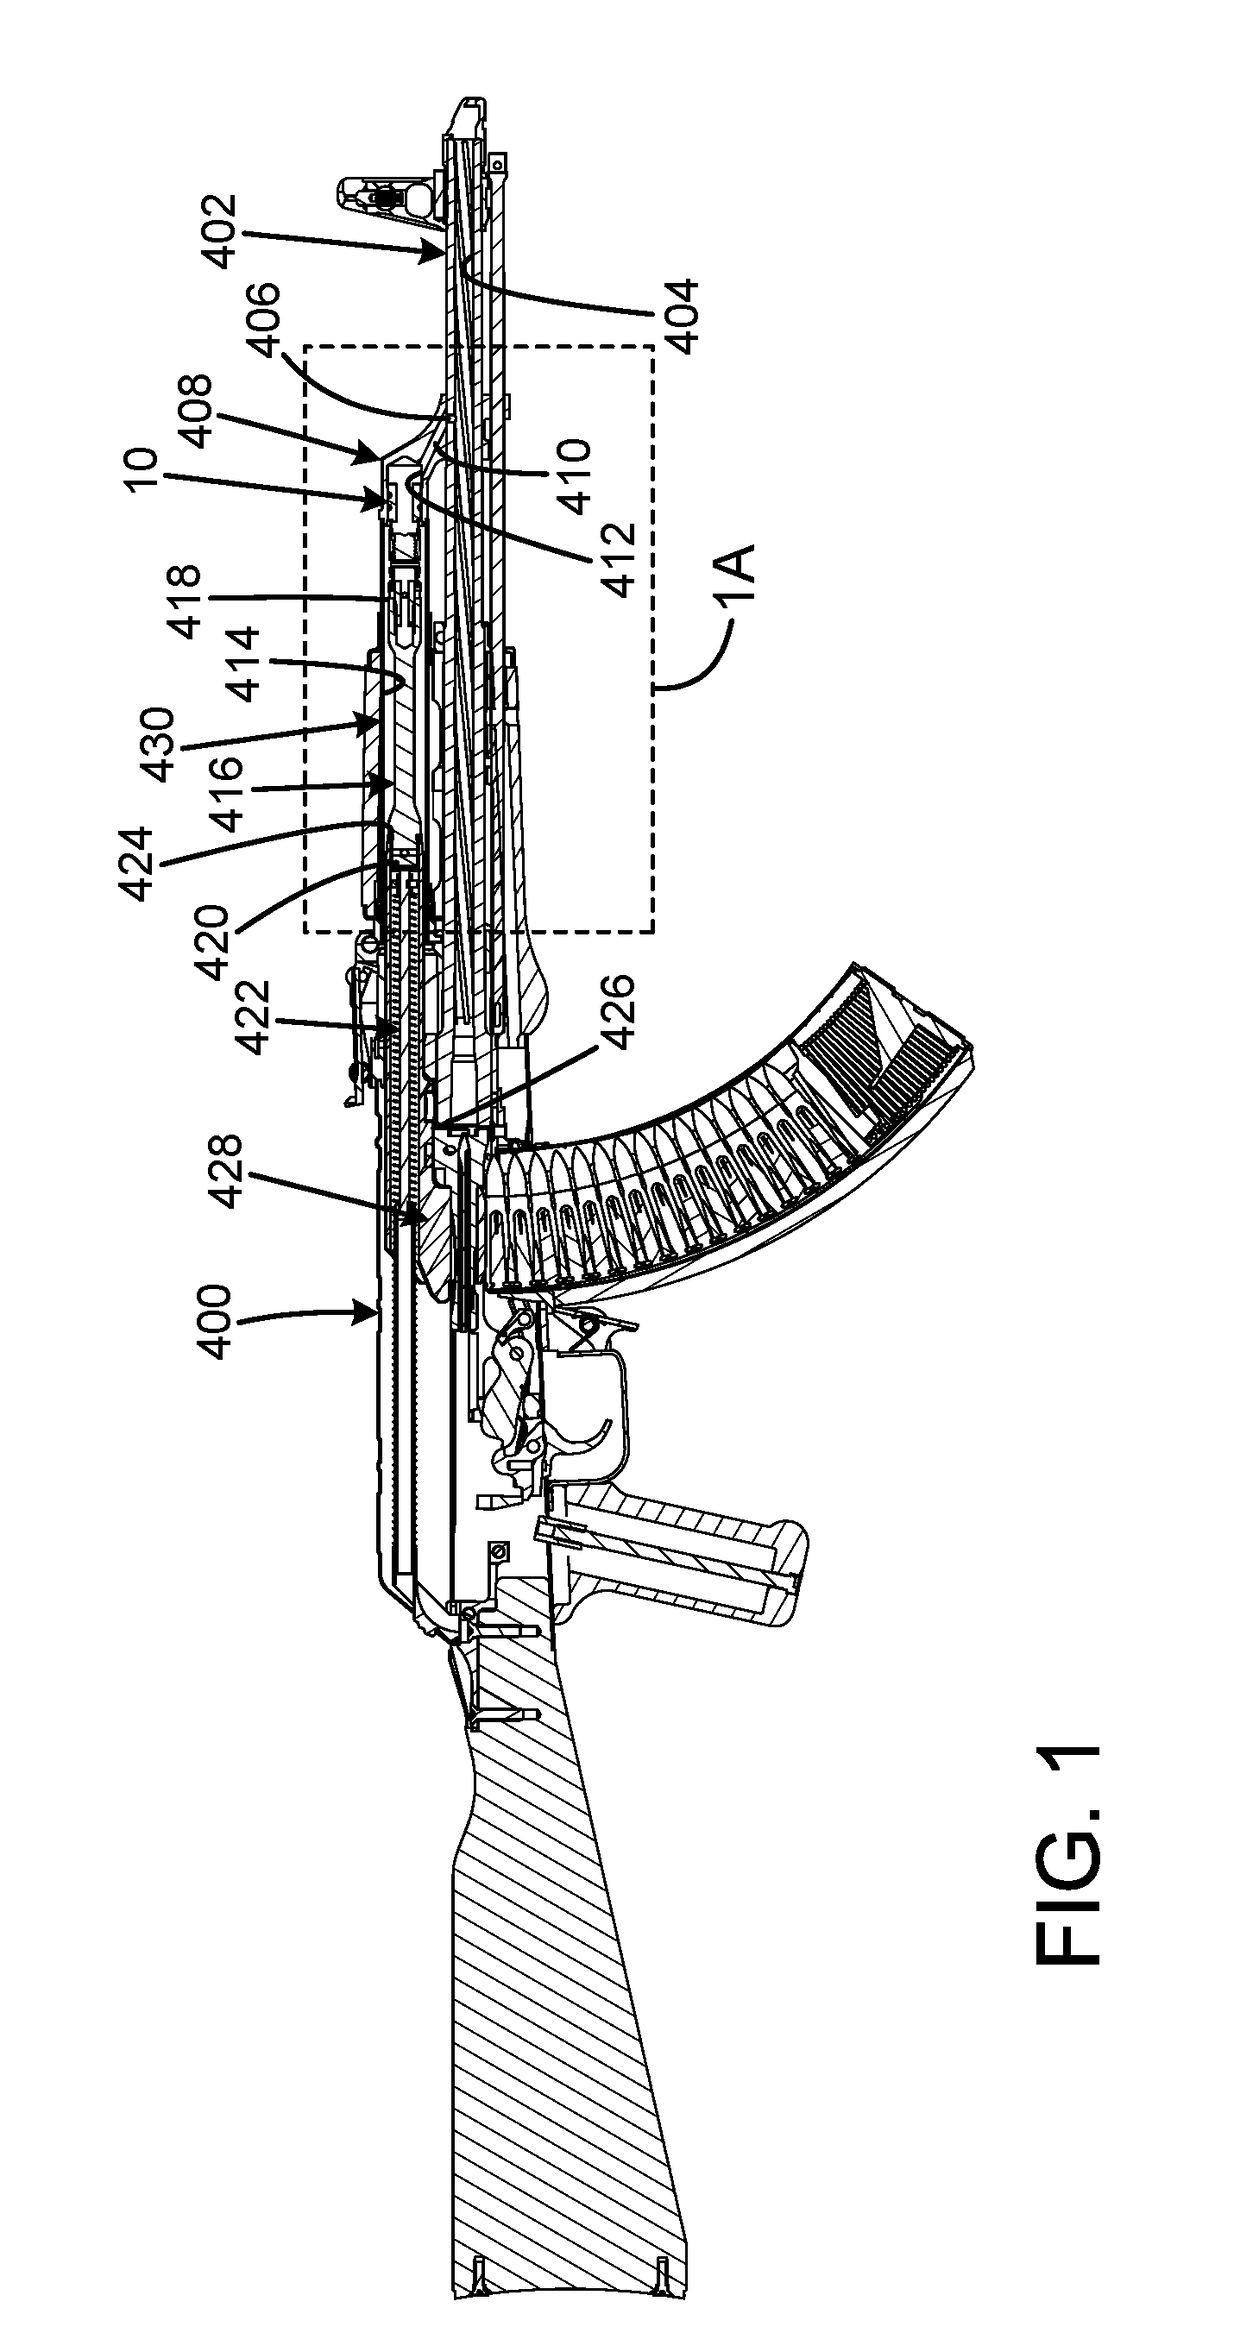 Piston for a gas-operated firearm